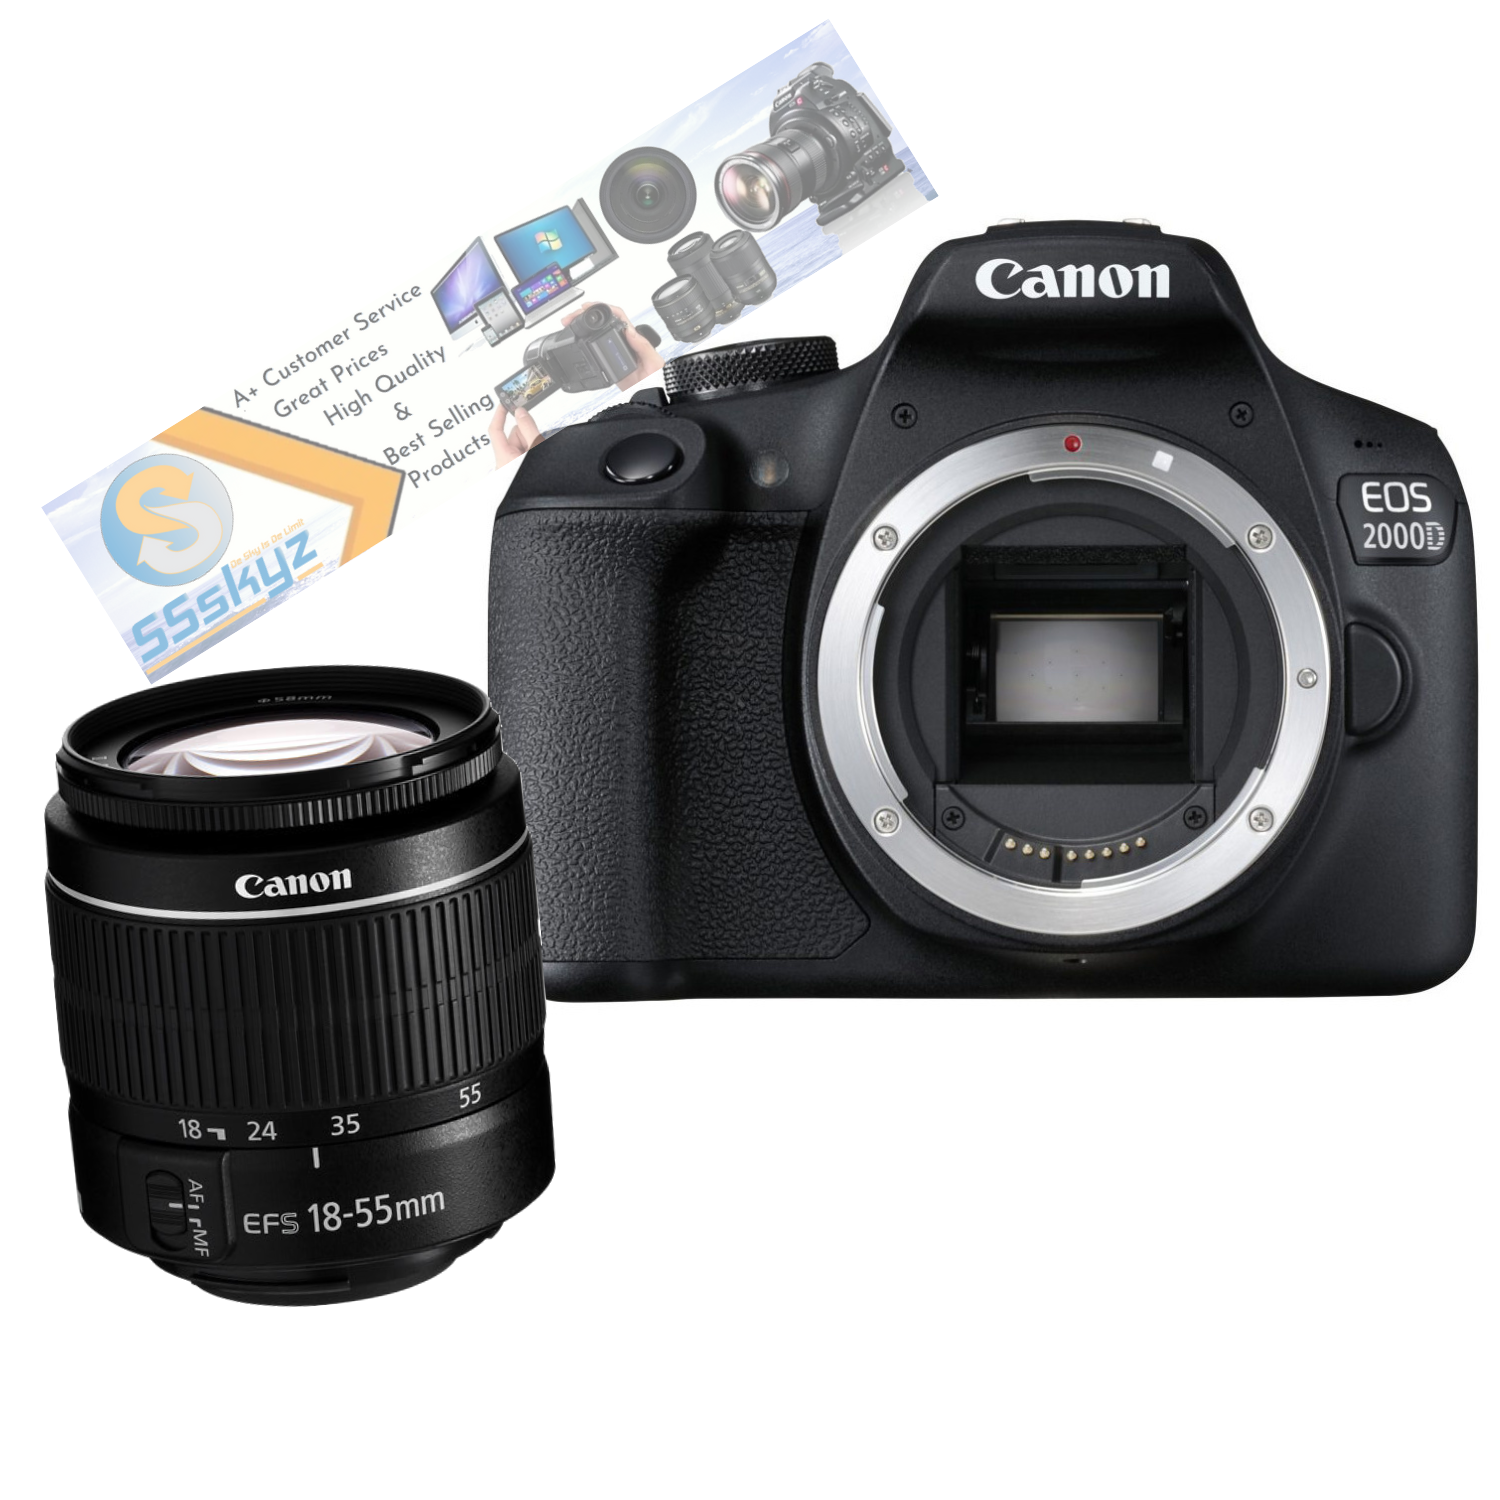 Canon EOS 2000D Rebel T7 DSLR Camera with 18-55mm III Lens With 25 Piece  Bundle 4549292111842